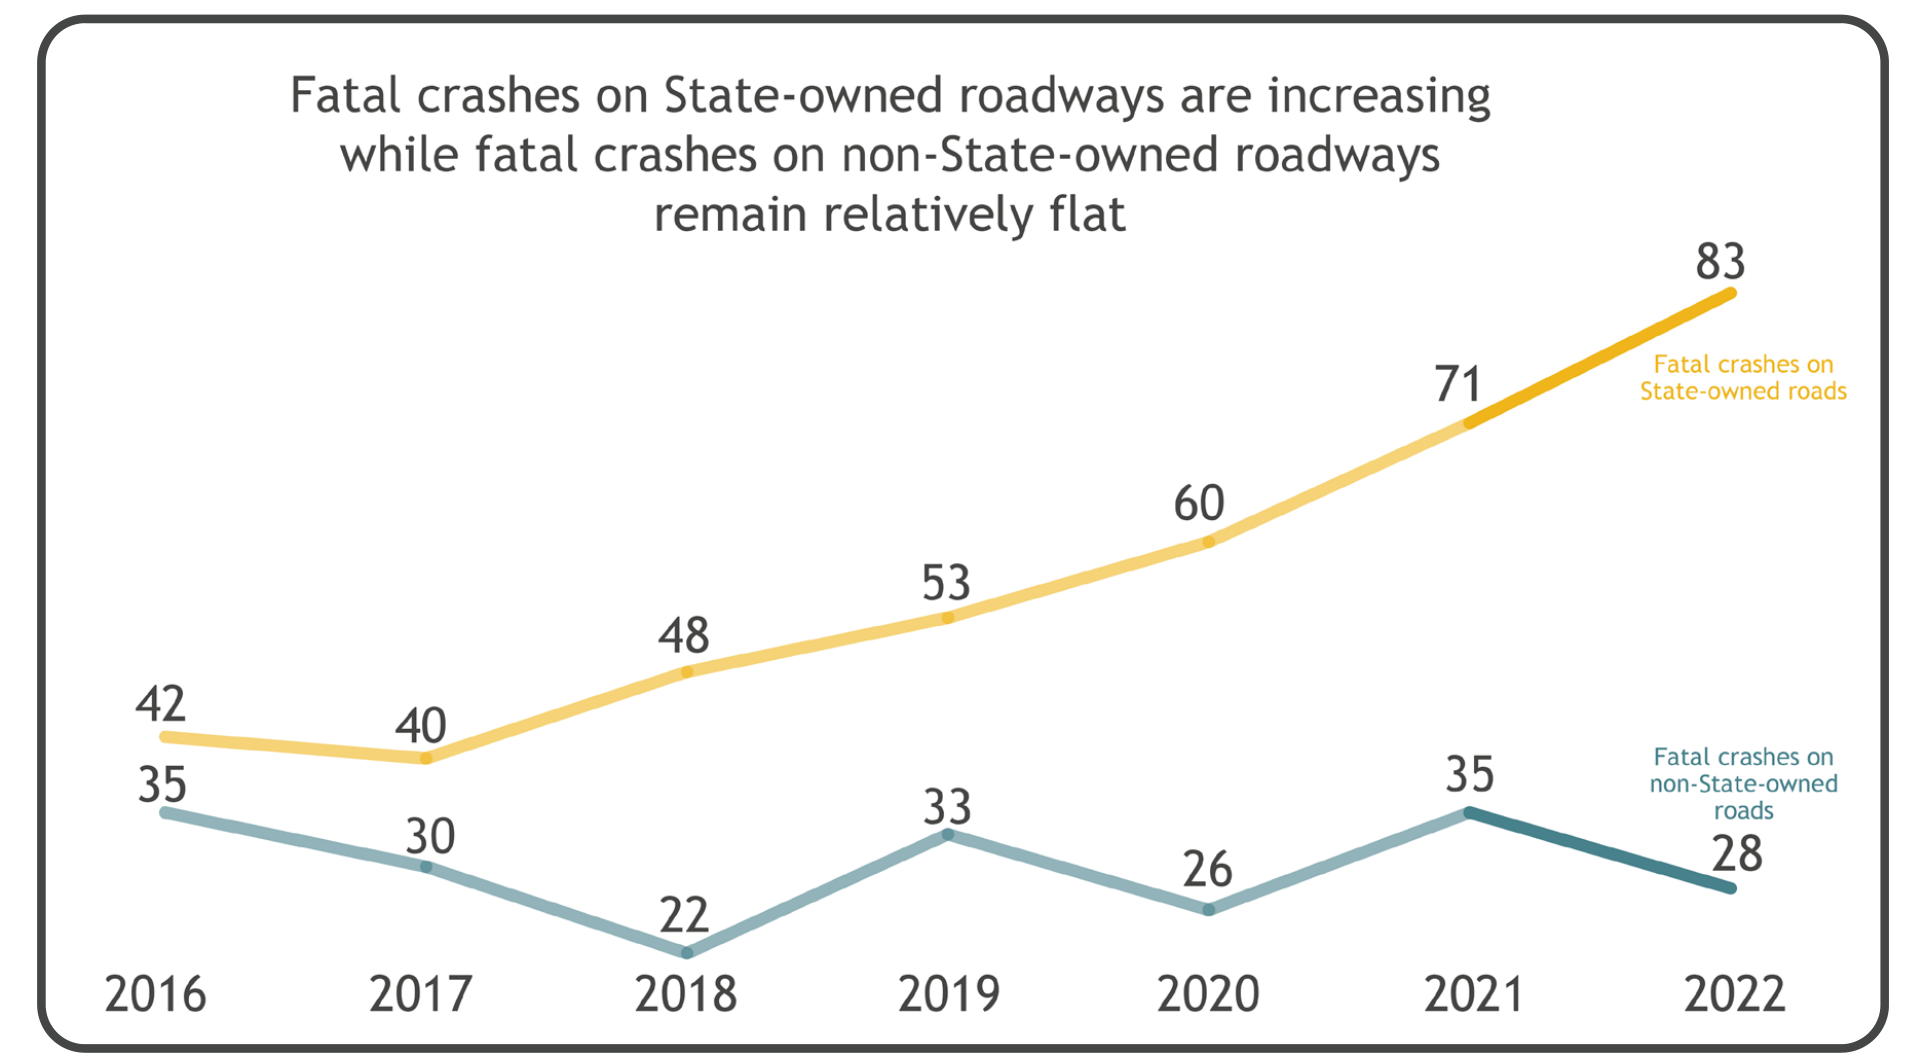 Chart showing a significant increase in fatalities on State owned roads over time